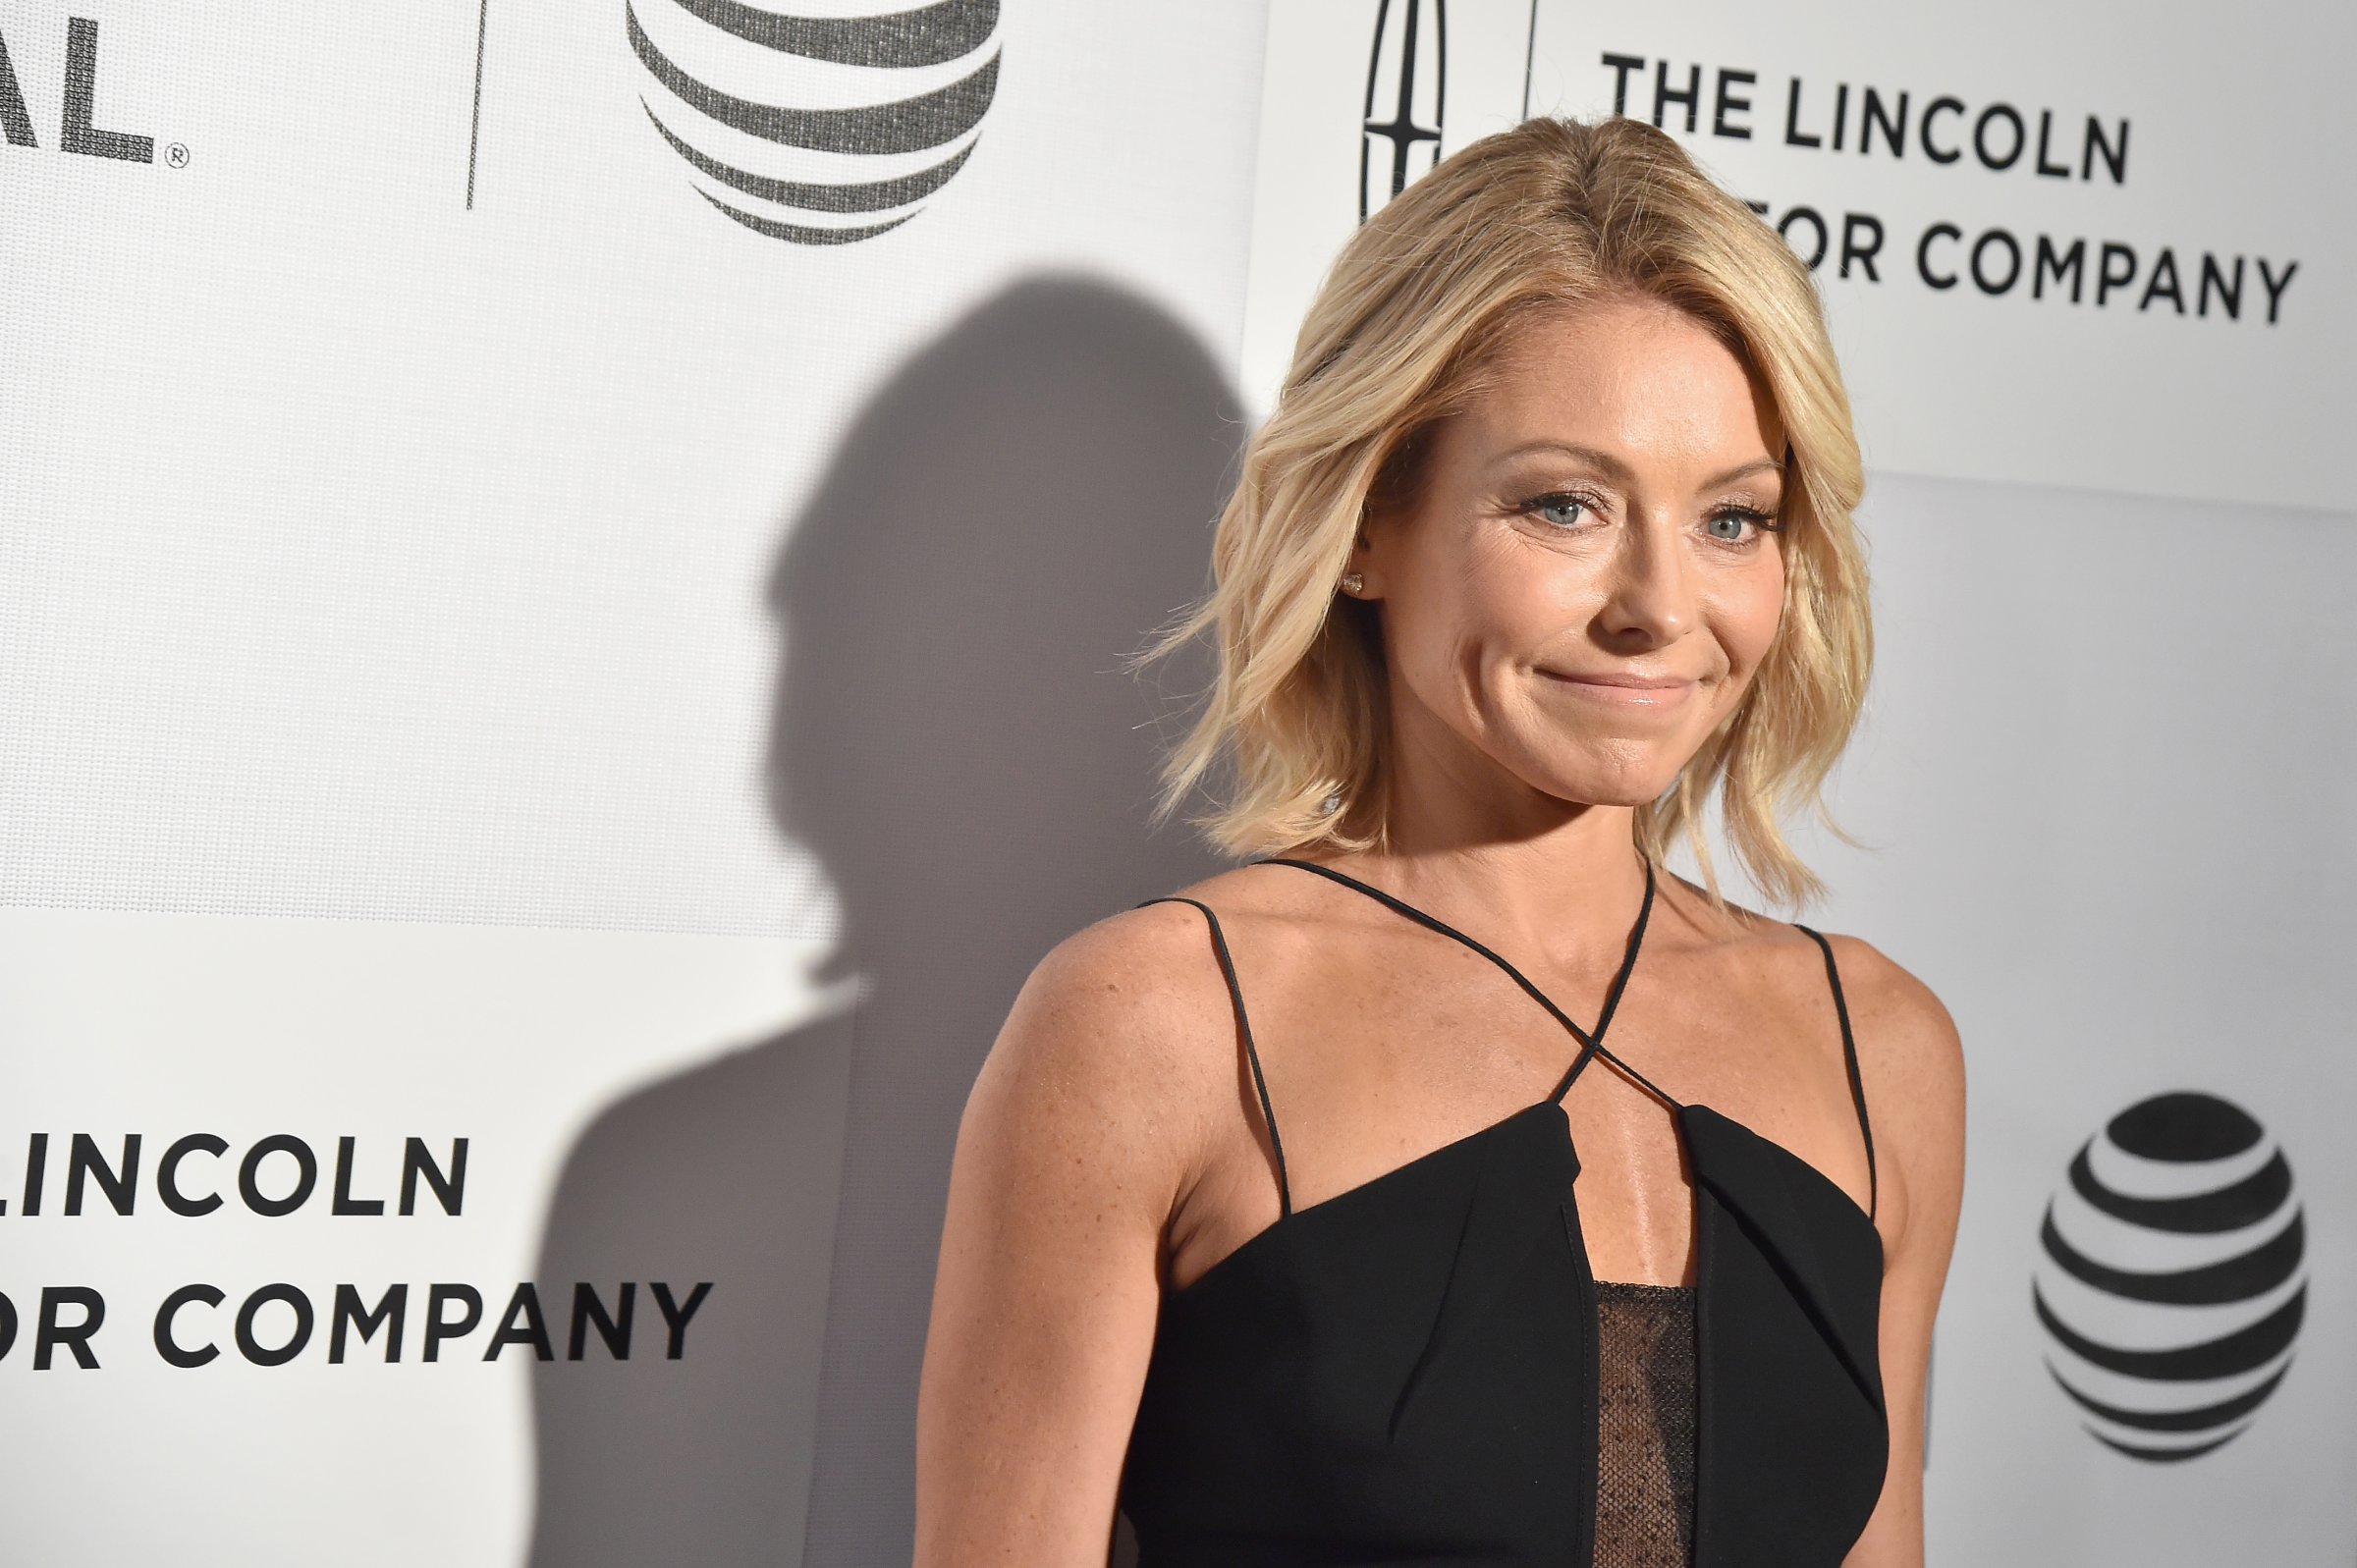 Kelly Ripa attends the "All We Had" Premiere during the 2016 Tribeca Film Festival at BMCC John Zuccotti Theater on April 15, 2016 in New York City.